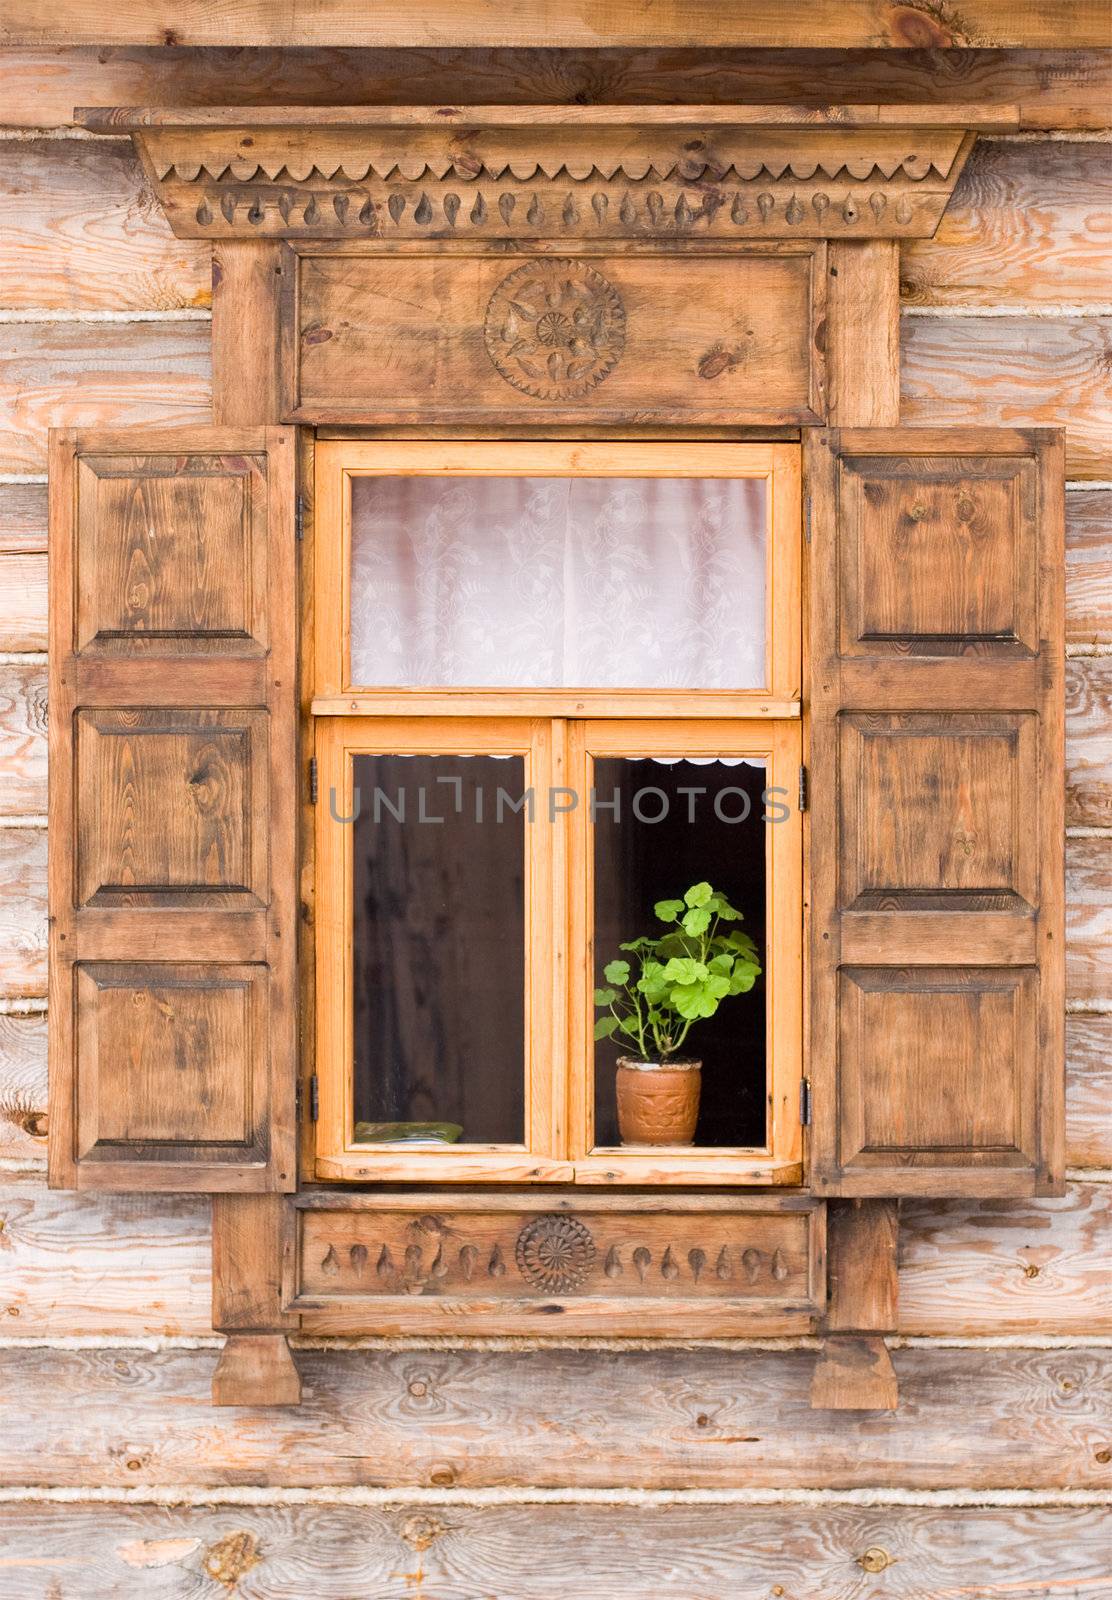 Flower in a pot behind the decorated window by naumoid